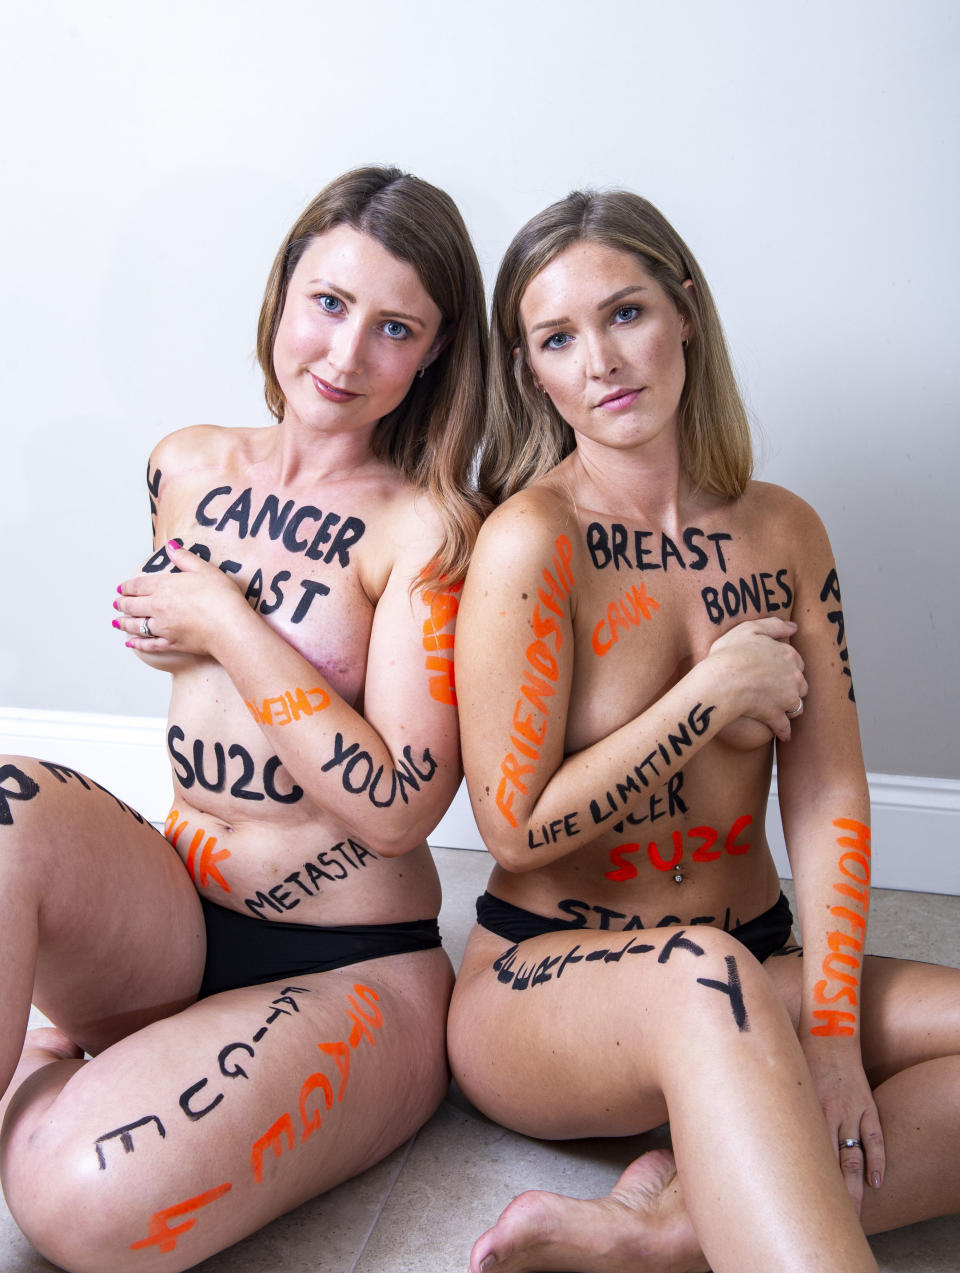 The women are taking part in a campaign for Stand up to Cancer [Photo: PA]